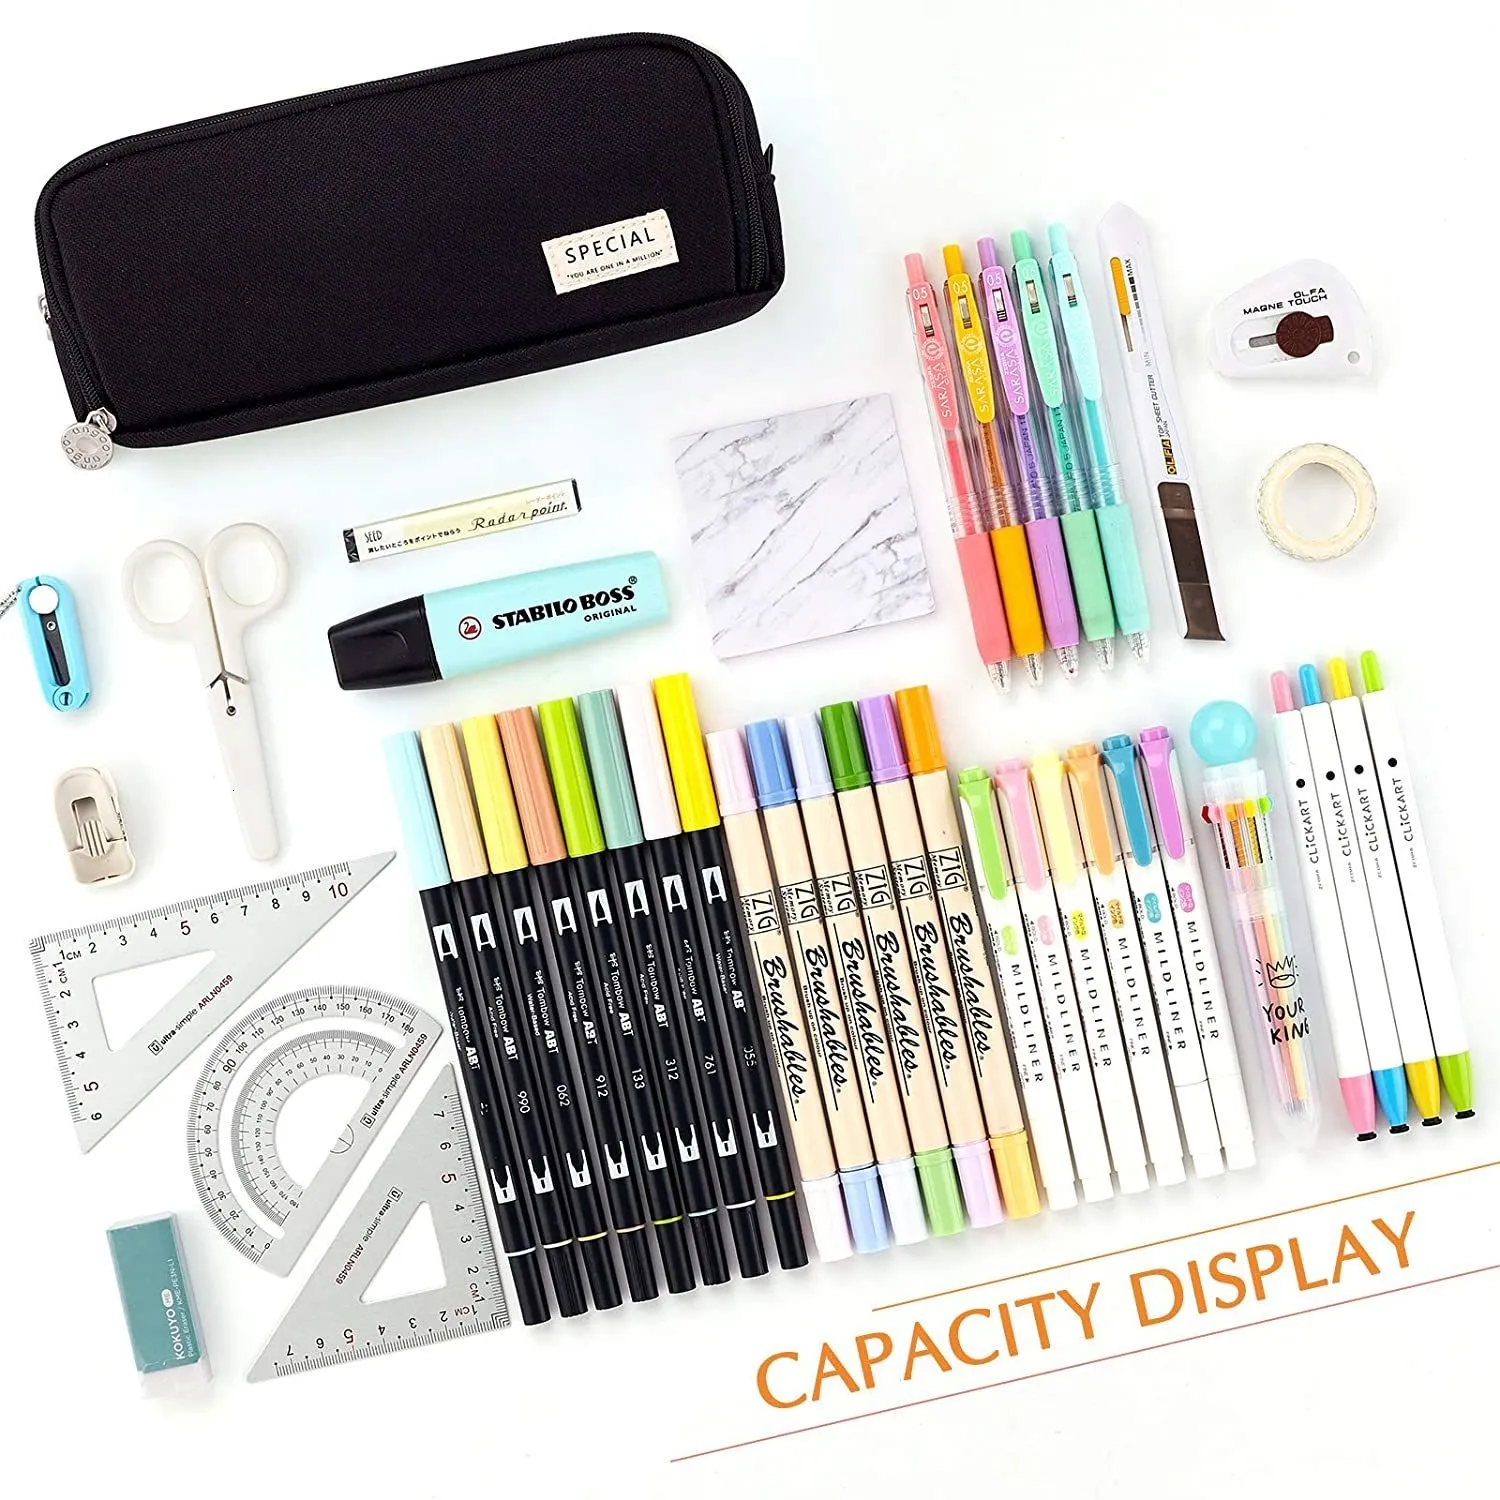 Pencil Bag Large Capacity Girls Pen Case Pouch Korean Organizer Kawaii Box  for Back To School Supplies Accessories Stationery